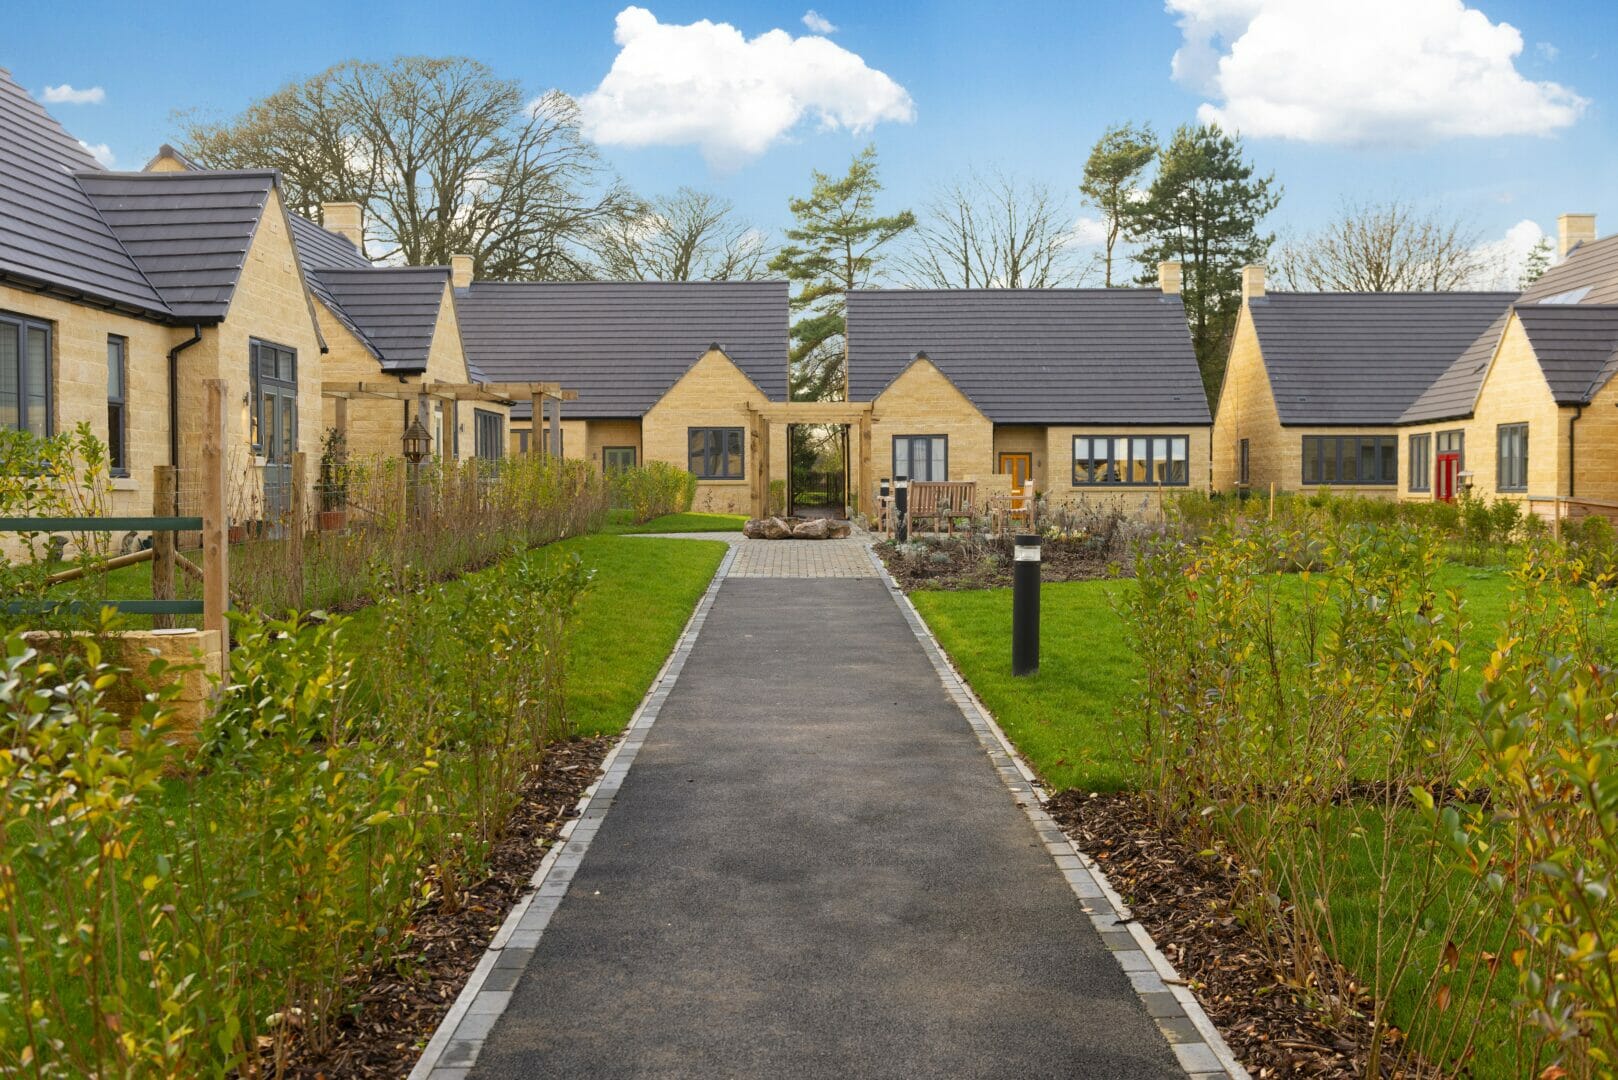 7.2m over-65s in the market for bungalows @McCarthyStone